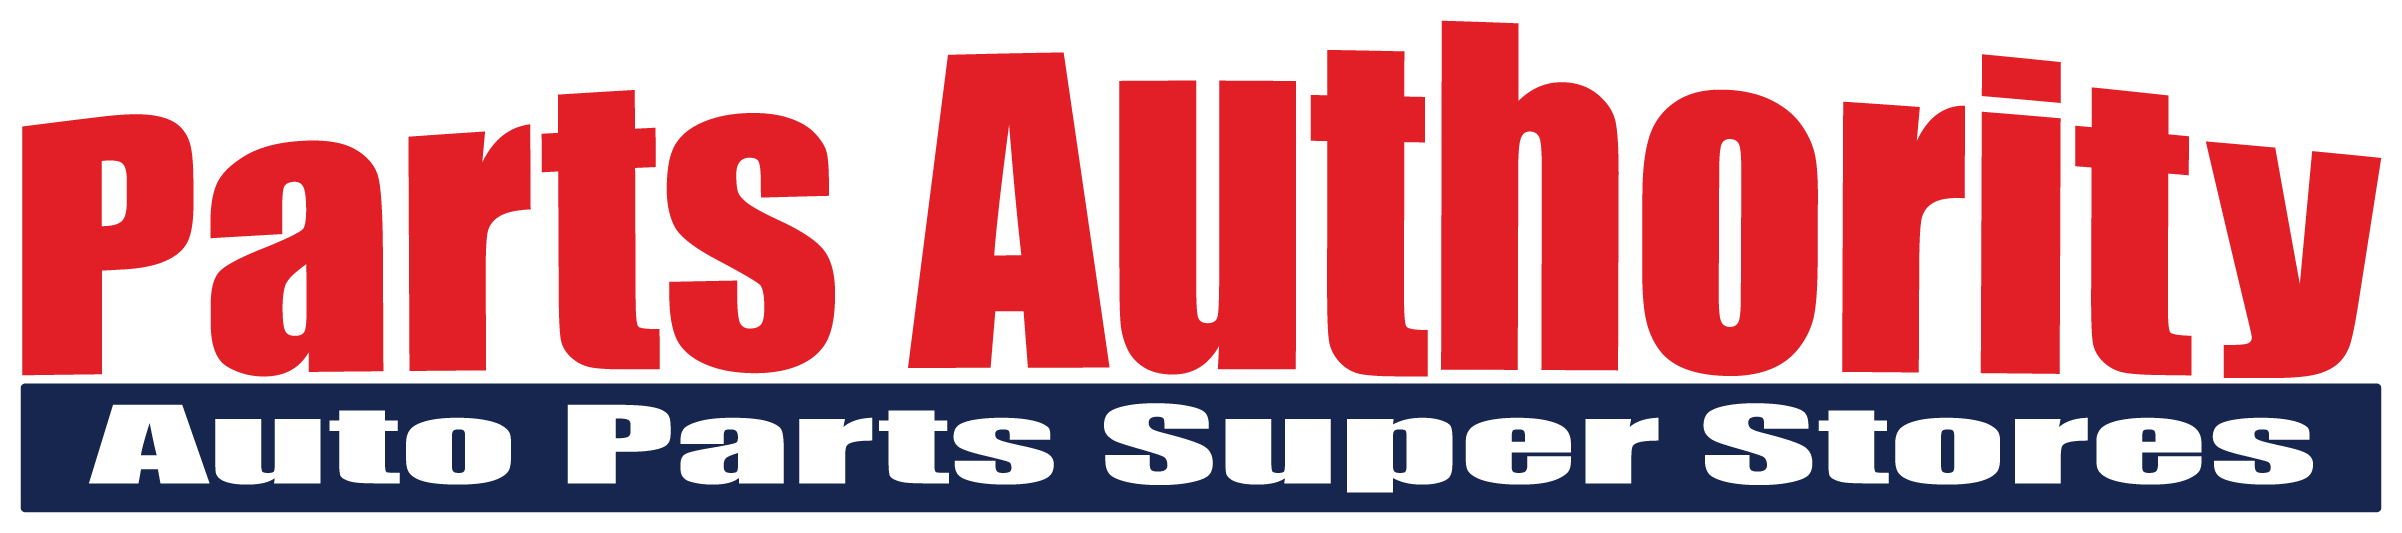 Parts Authority Saves Time And Developer Resources With Automated Edi